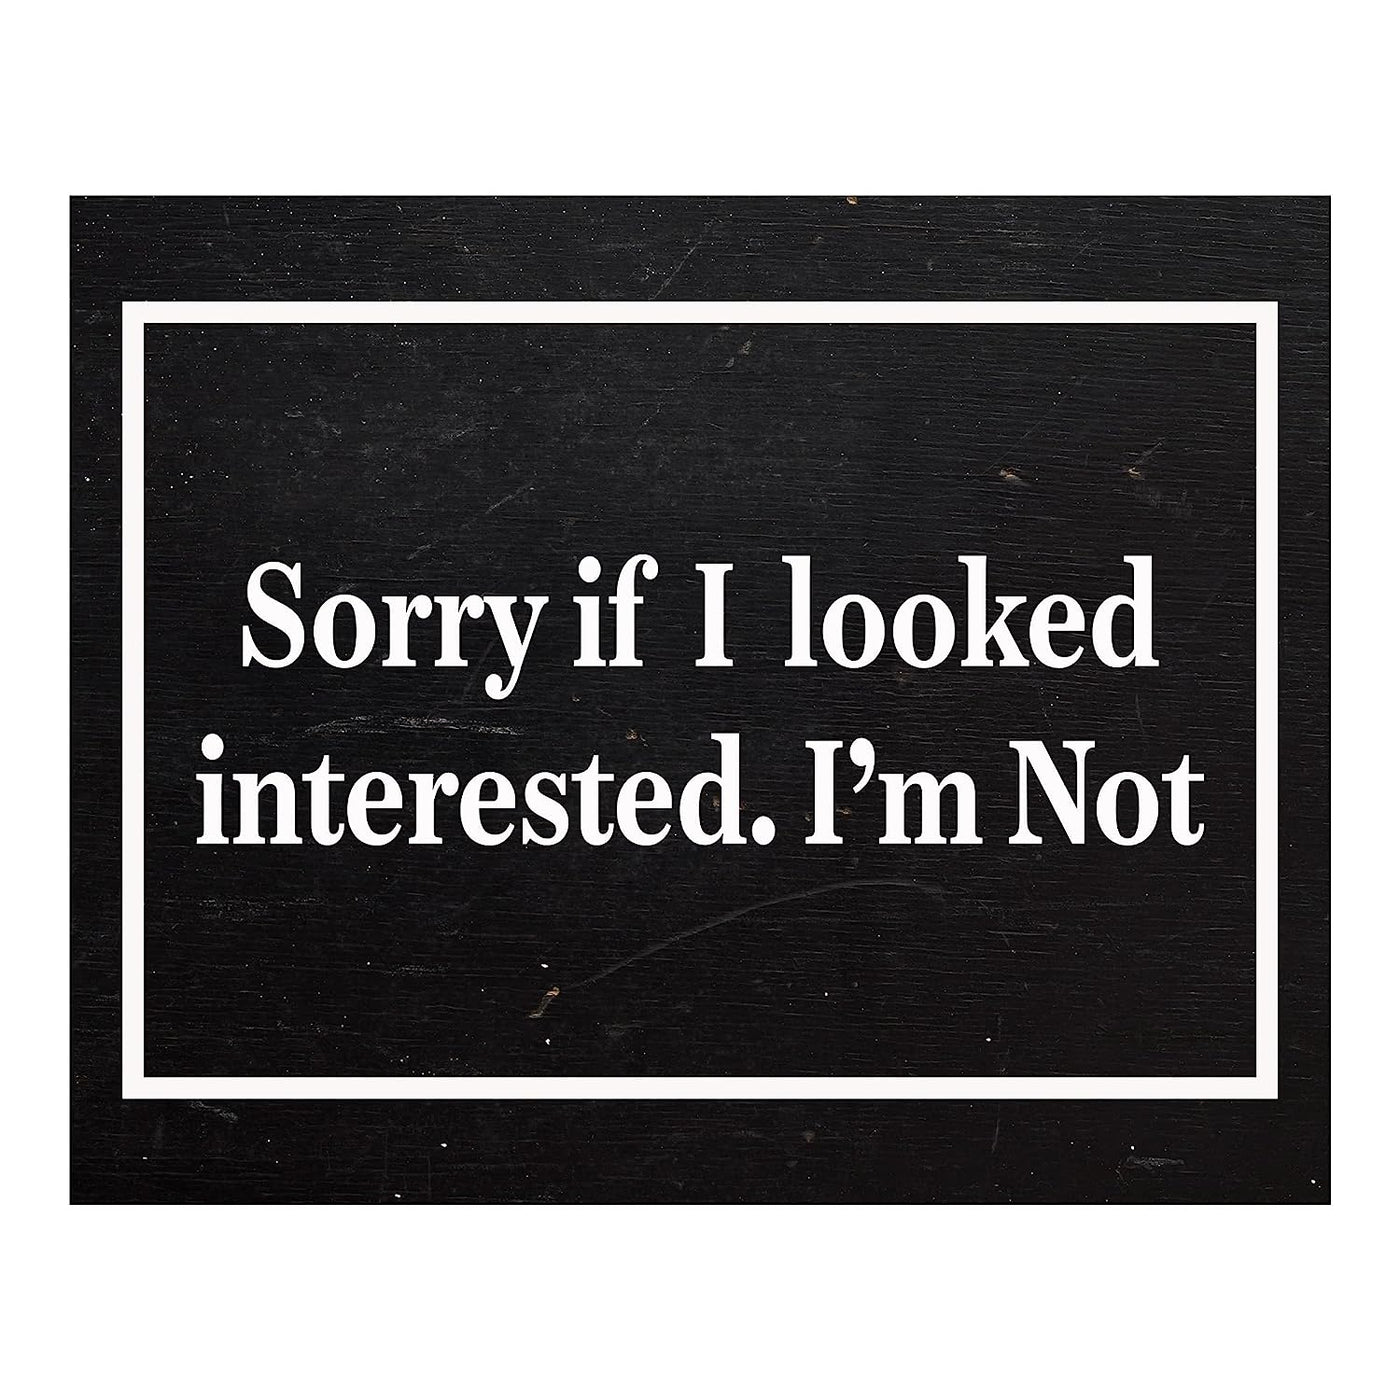 Sorry If I Looked Interested-I'm Not Funny Sign Wall Art -10 x 8" Sarcastic Poster Print-Ready to Frame. Humorous Decor for Home-Office-Shop-Bar-Man Cave. Fun Novelty Sign & Gift! Printed on Paper.